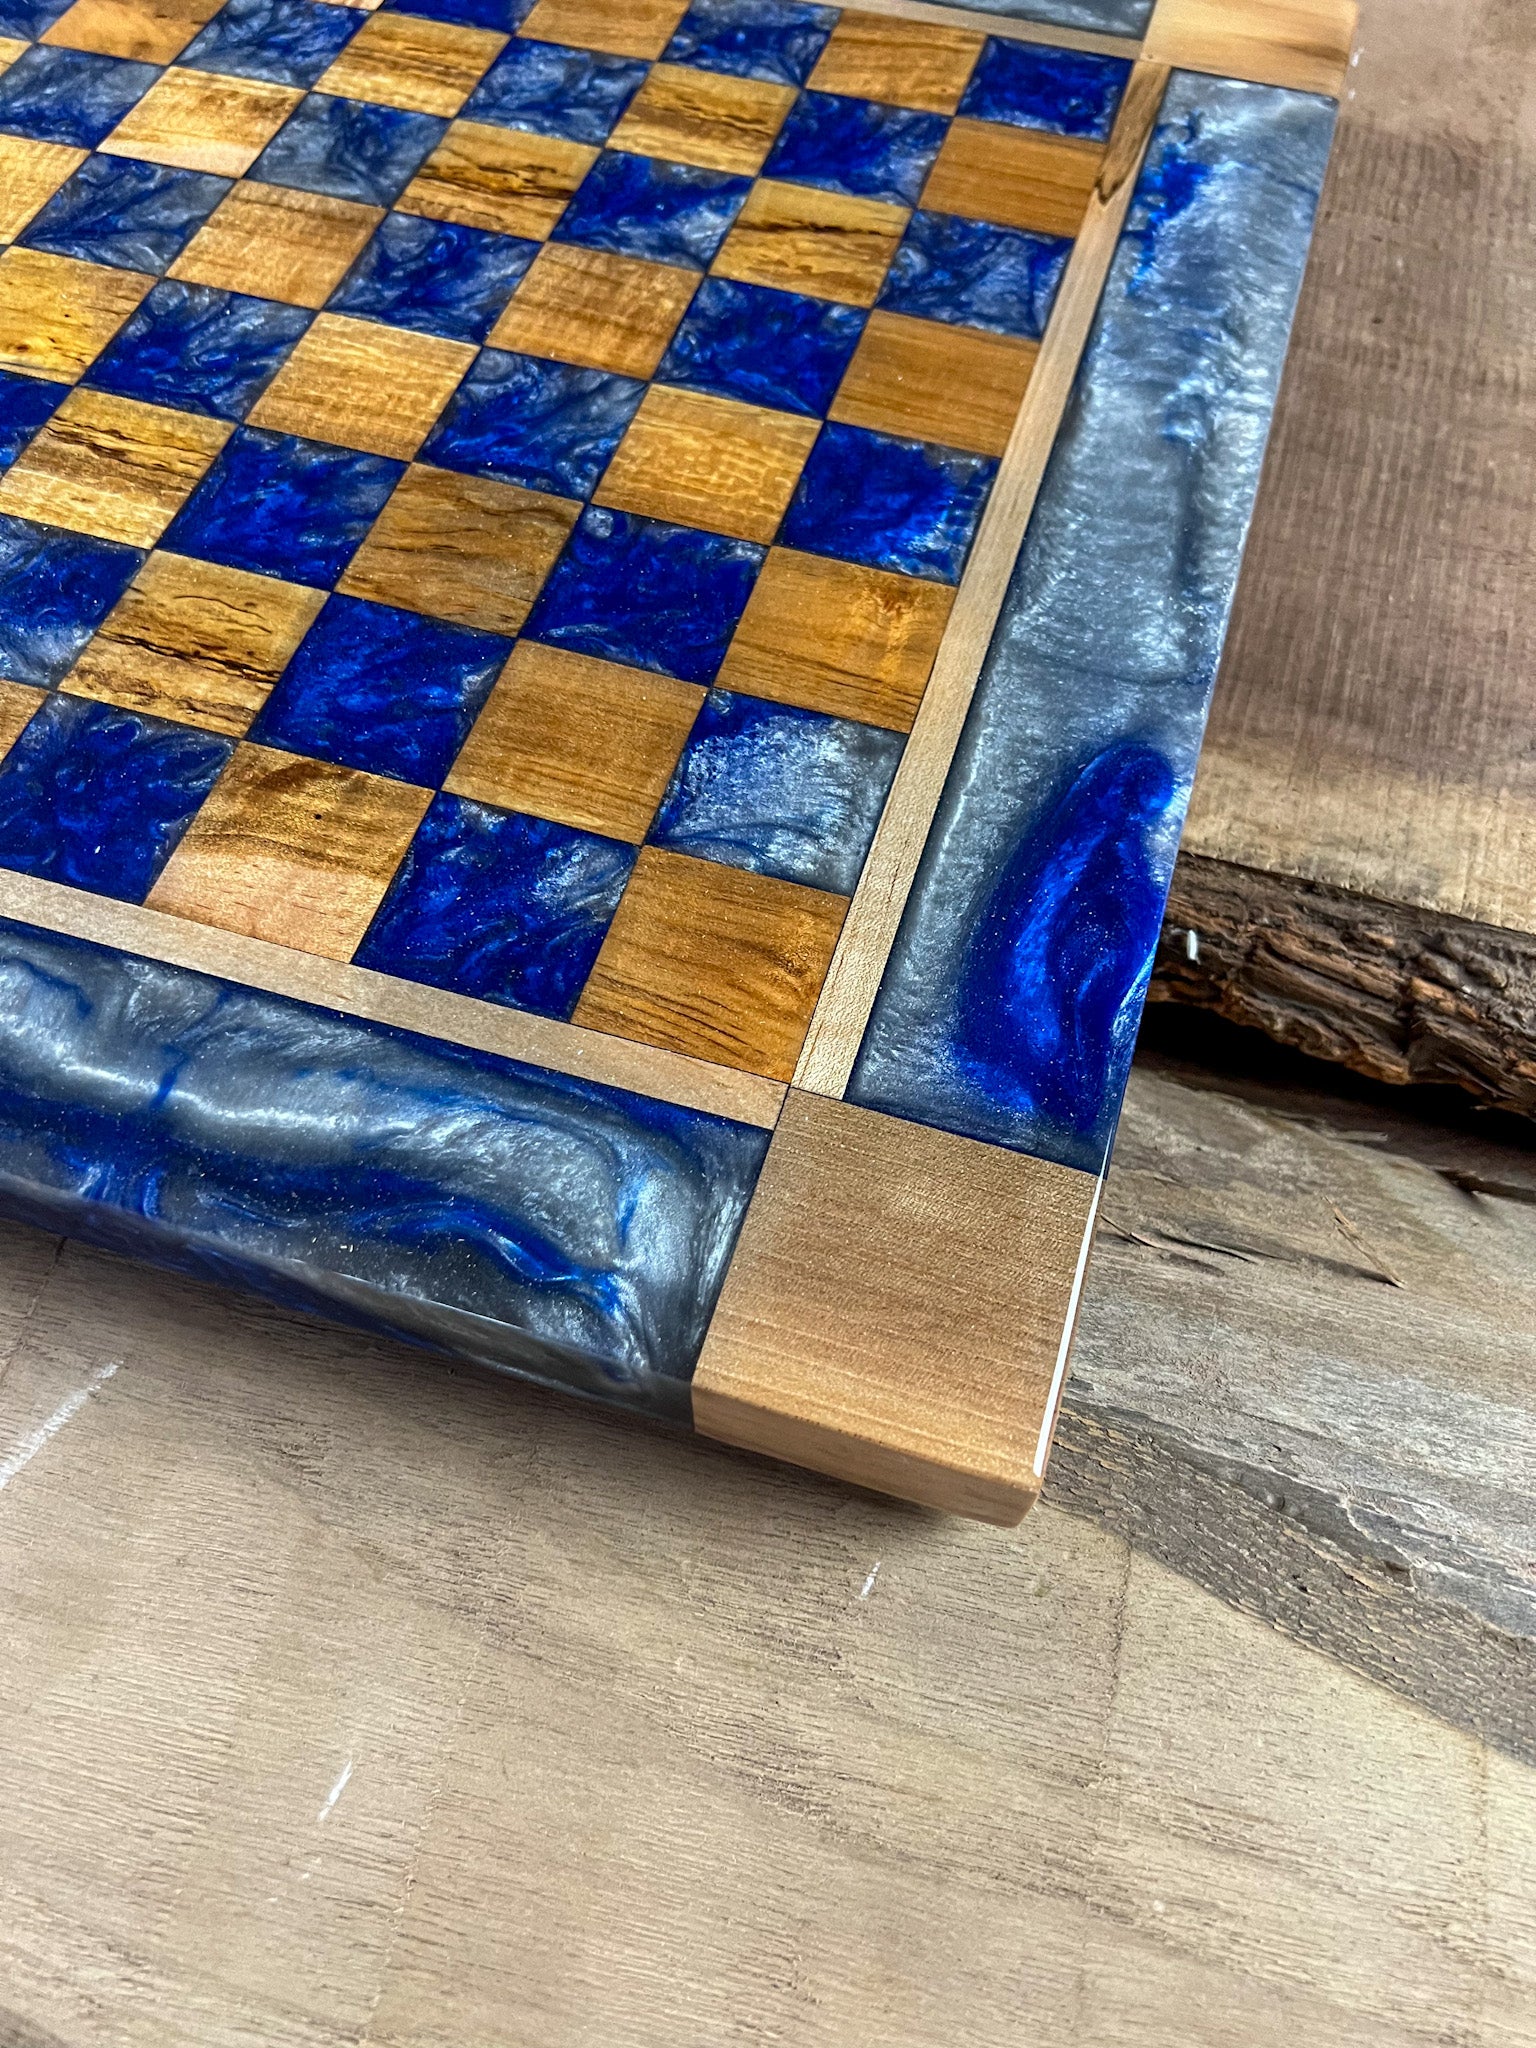 Deep Blue Silver Cloud Maple Wood Chess Board (With Border)